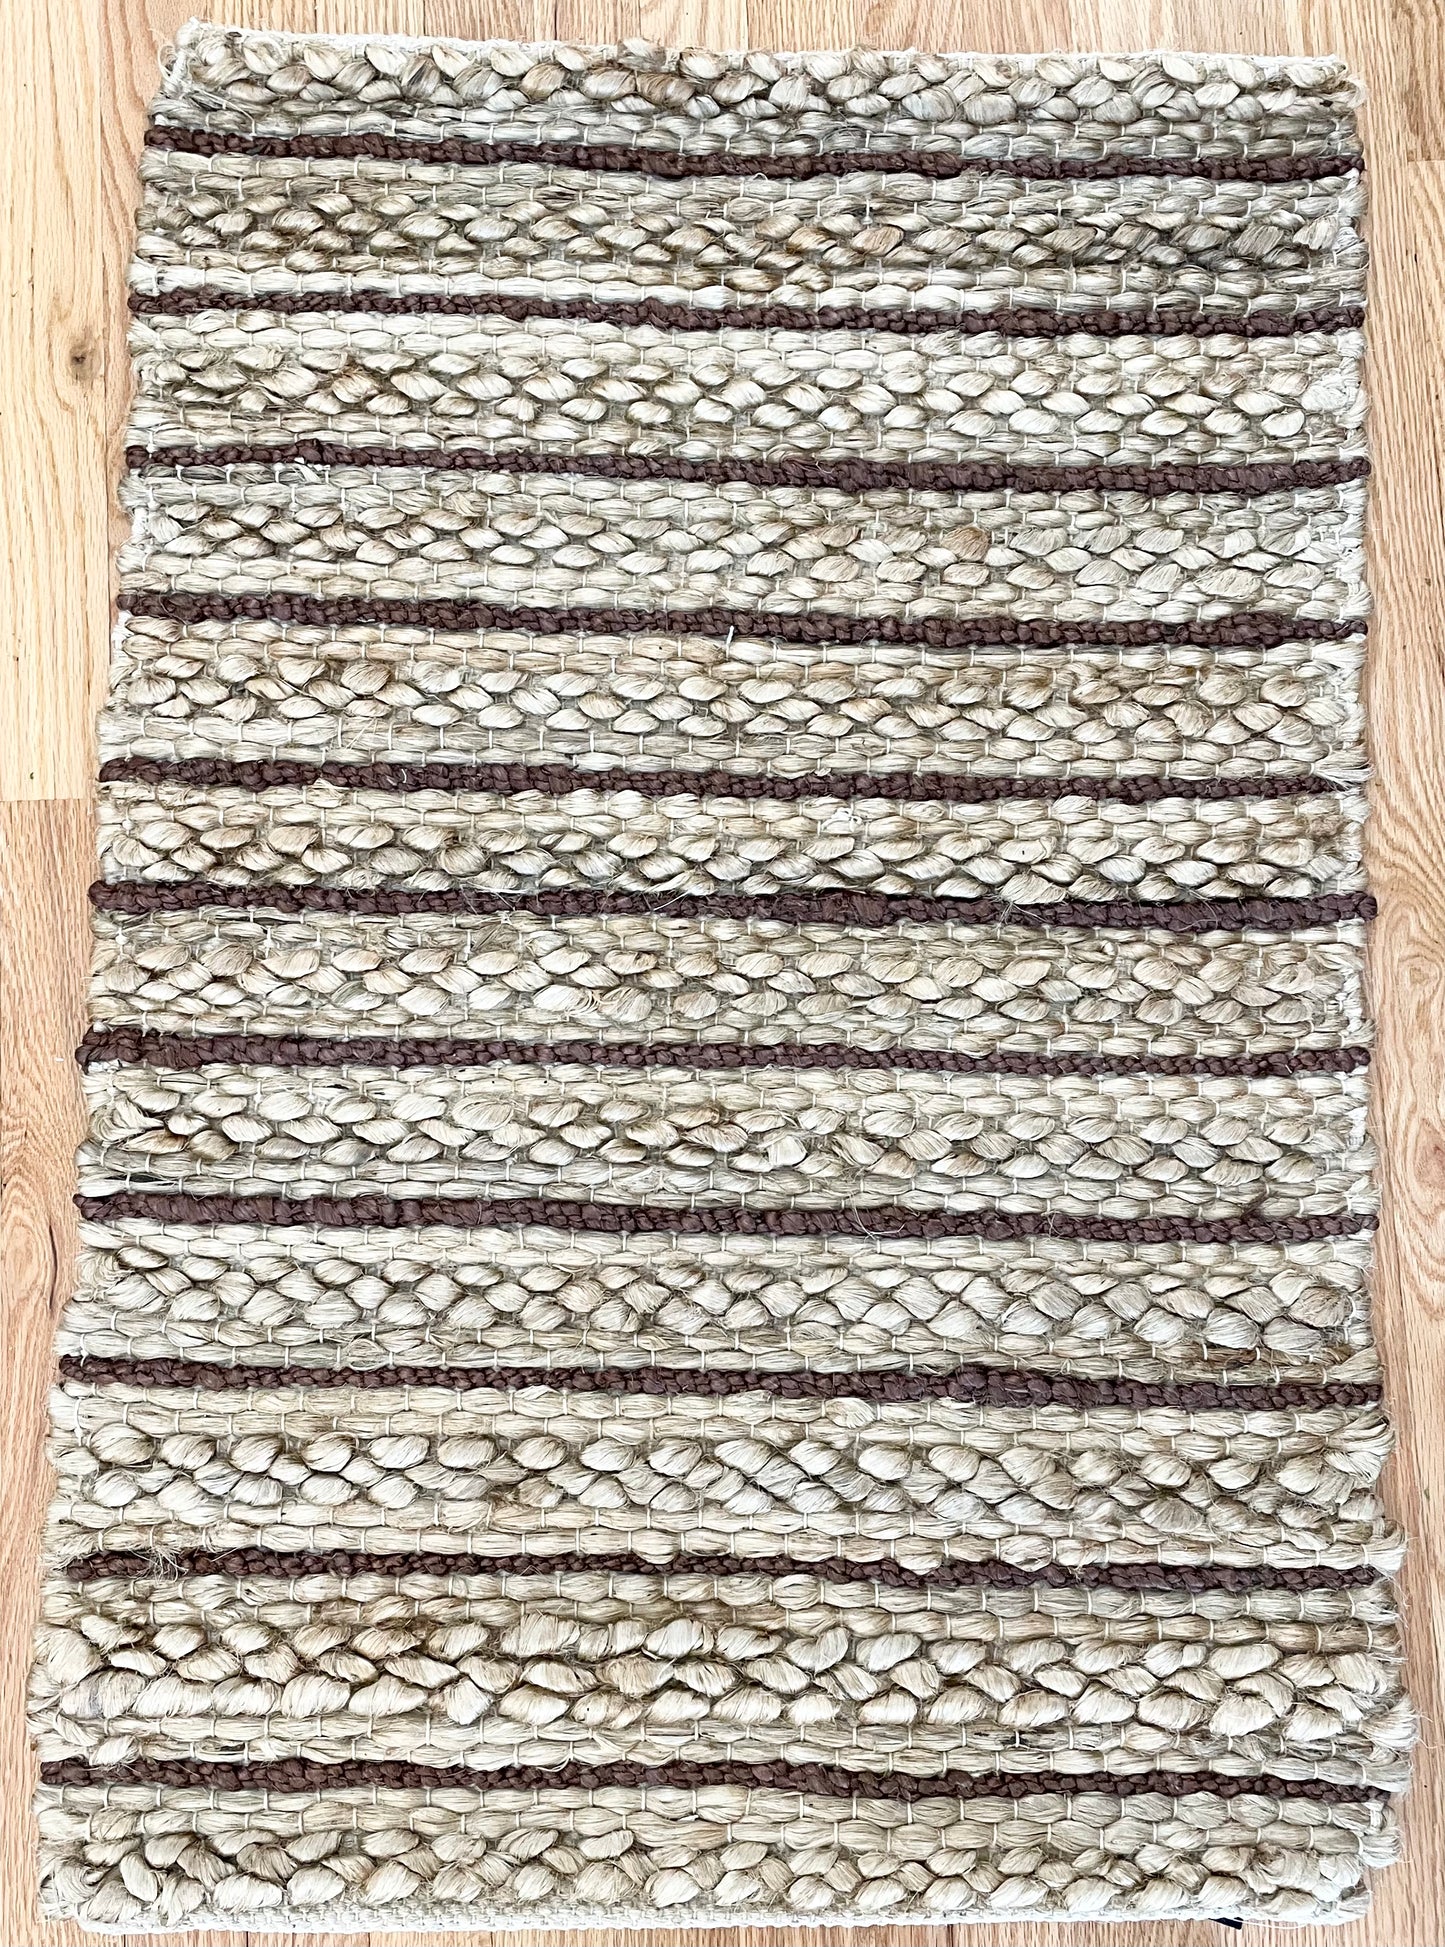 TAN AND BROWN CHUNKY BRAIDED STRIPED JUTE HANDWOVEN RUG